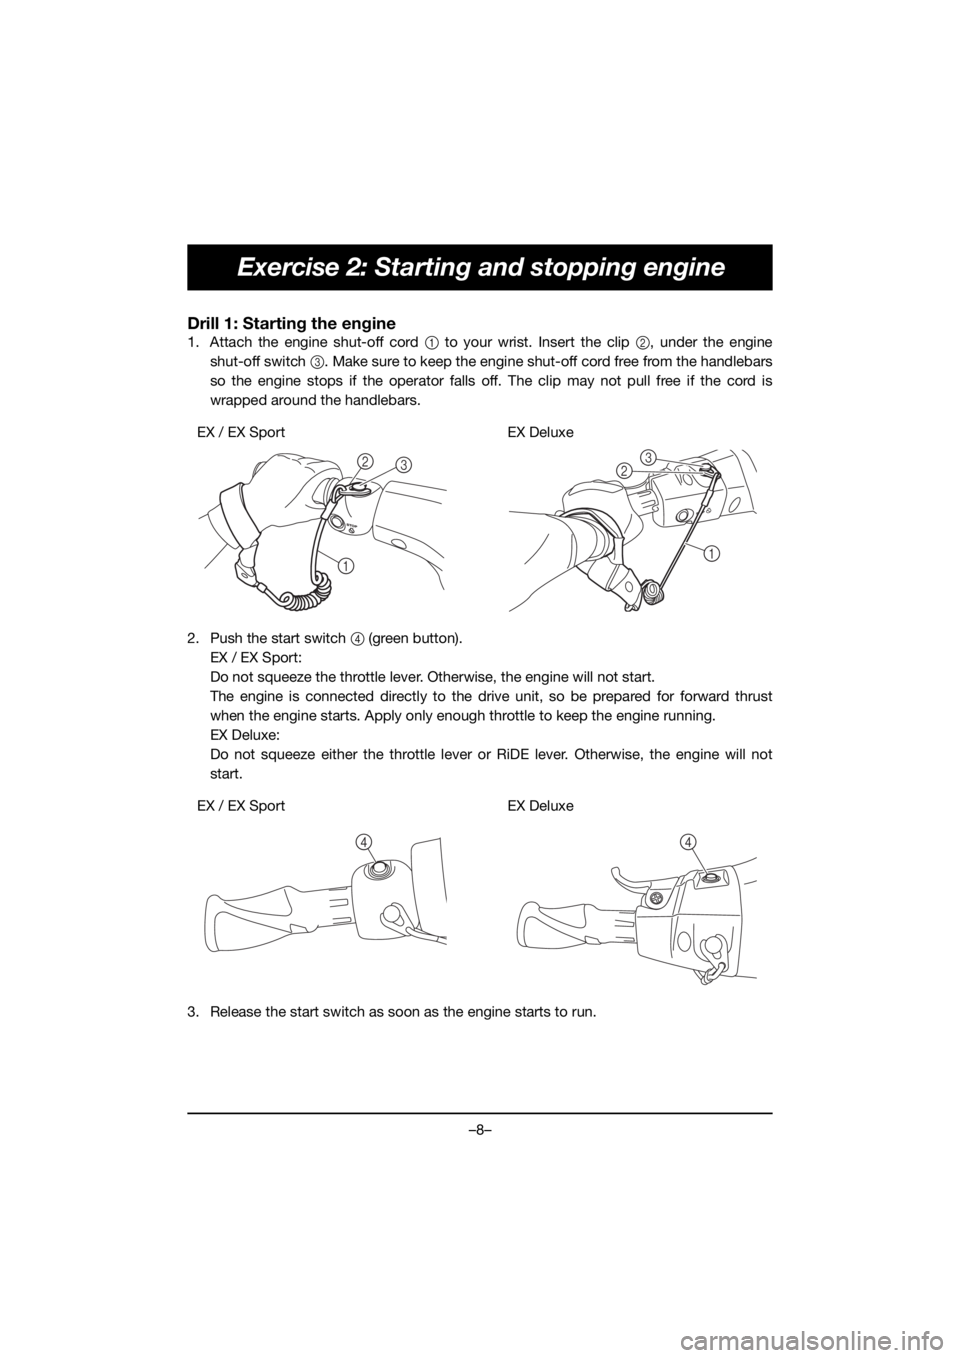 YAMAHA EX SPORT 2019  Manual de utilização (in Portuguese) –8–
Exercise 2: Starting and stopping engine
Drill 1: Starting the engine
1. Attach the engine shut-off cord 1 to your wrist. Insert the clip 2, under the engine
shut-off switch 3. Make sure to ke